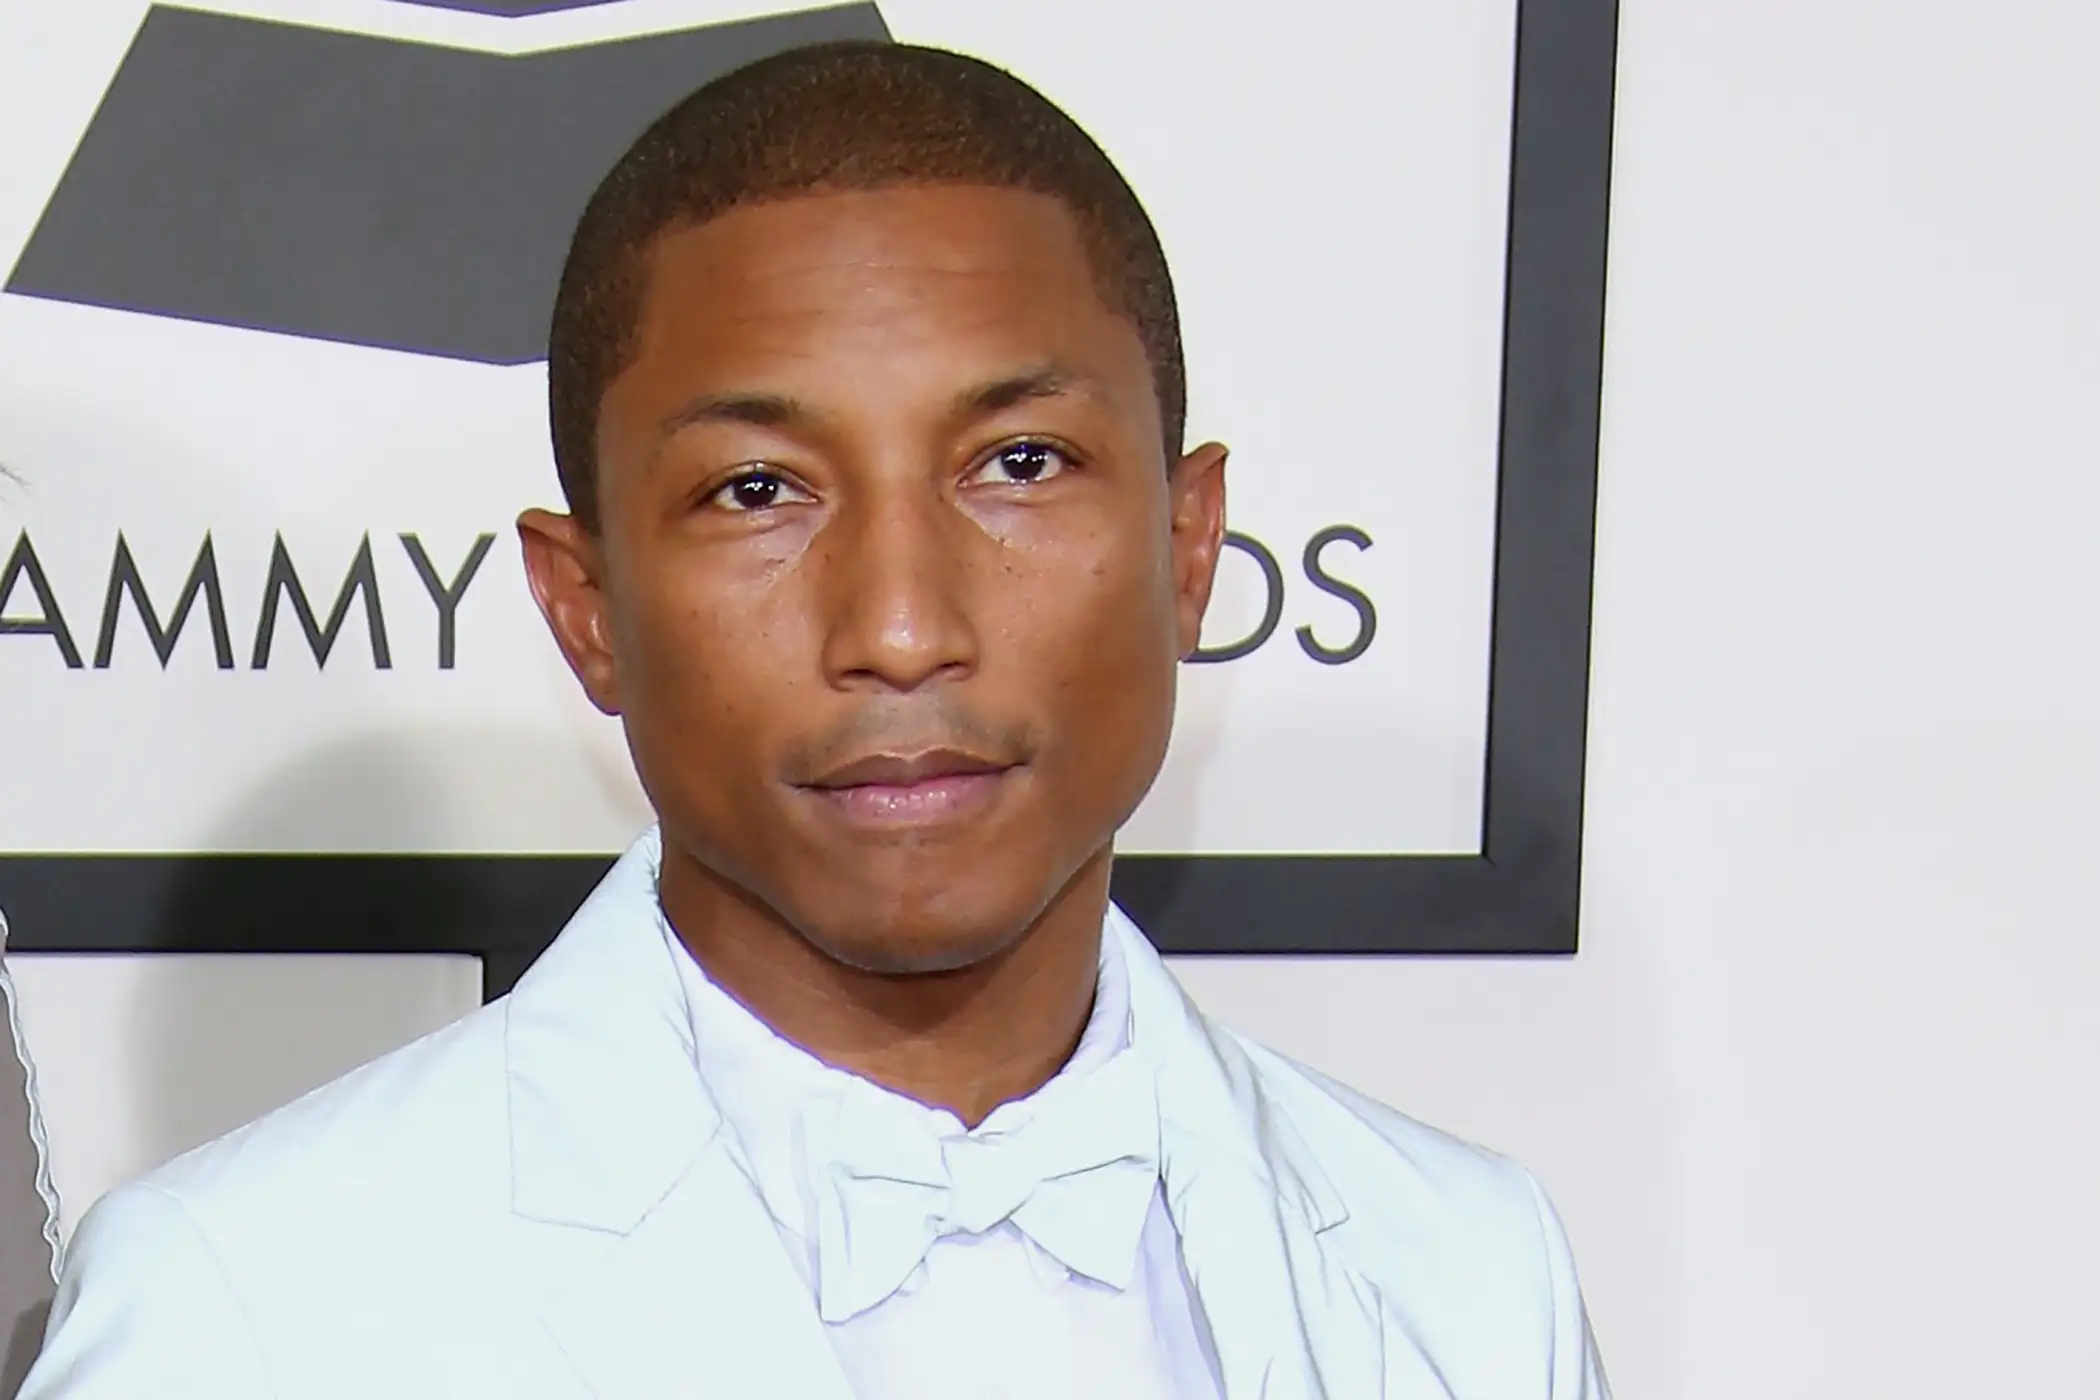 Pharrell Williams attends The 57th Annual Grammy Awards at the Staples Center on February 8, 2015 in Los Angeles, California.